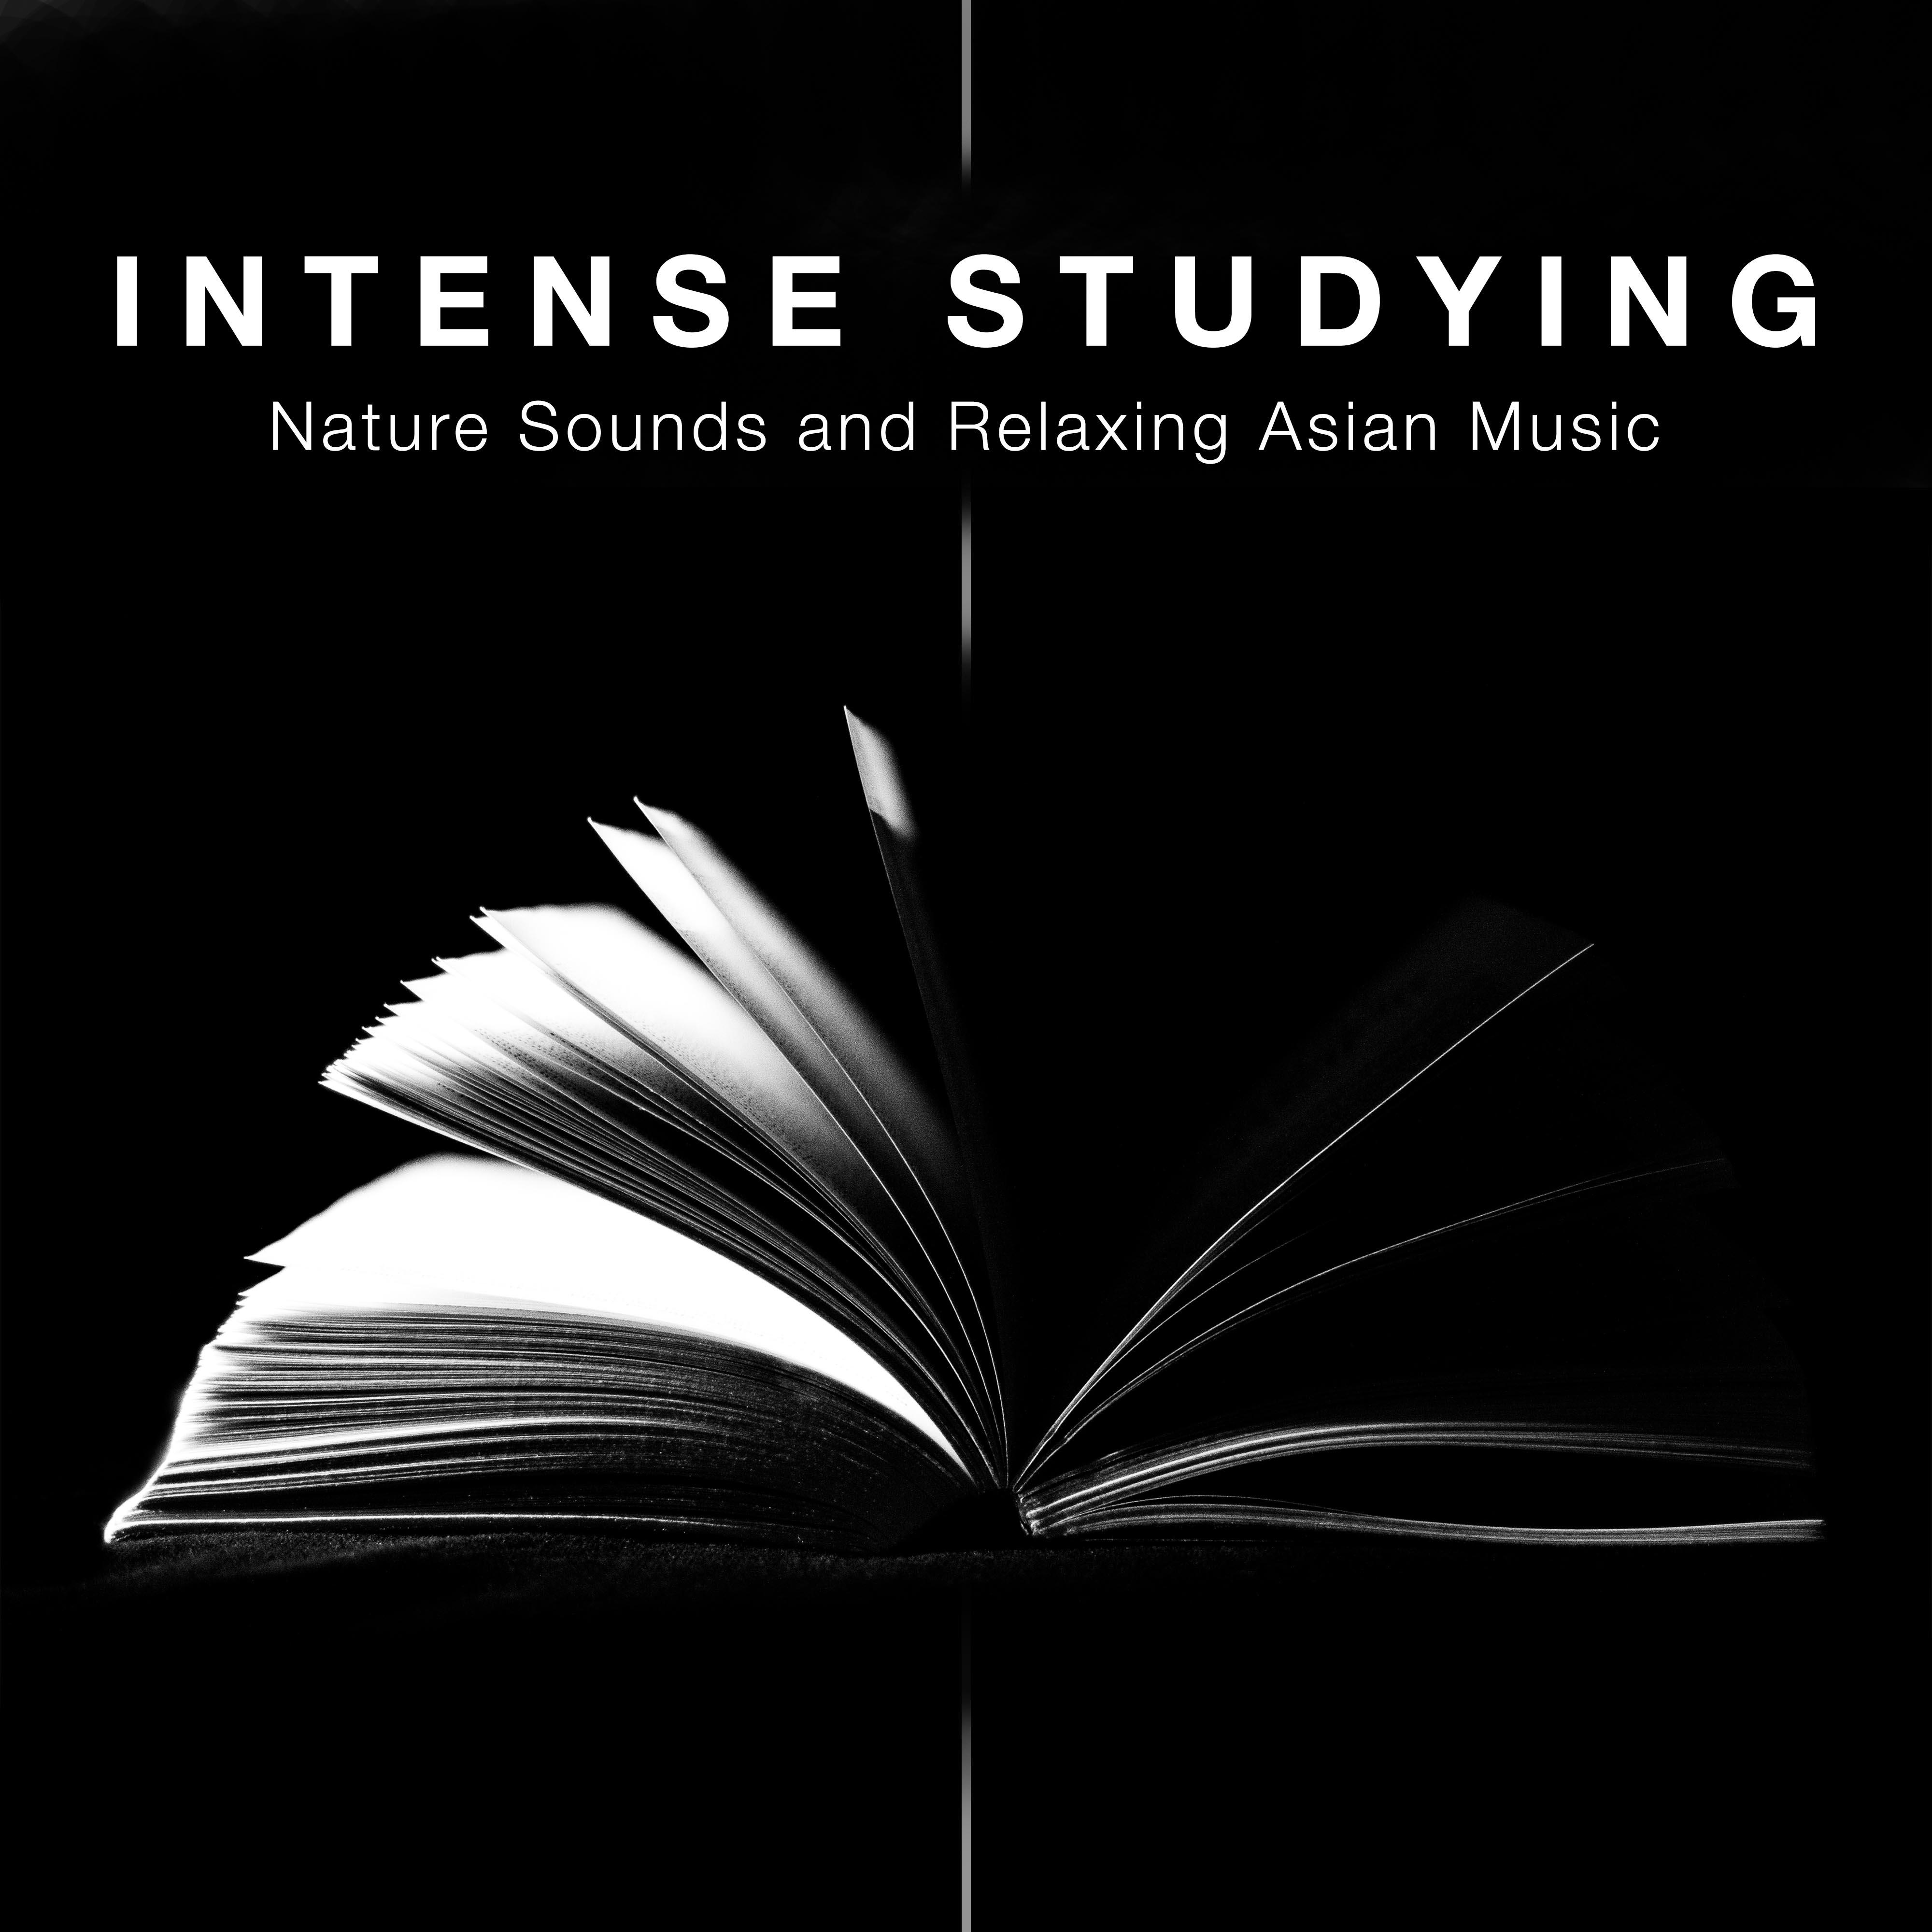 Intense Studying - Nature Sounds and Relaxing Asian Music